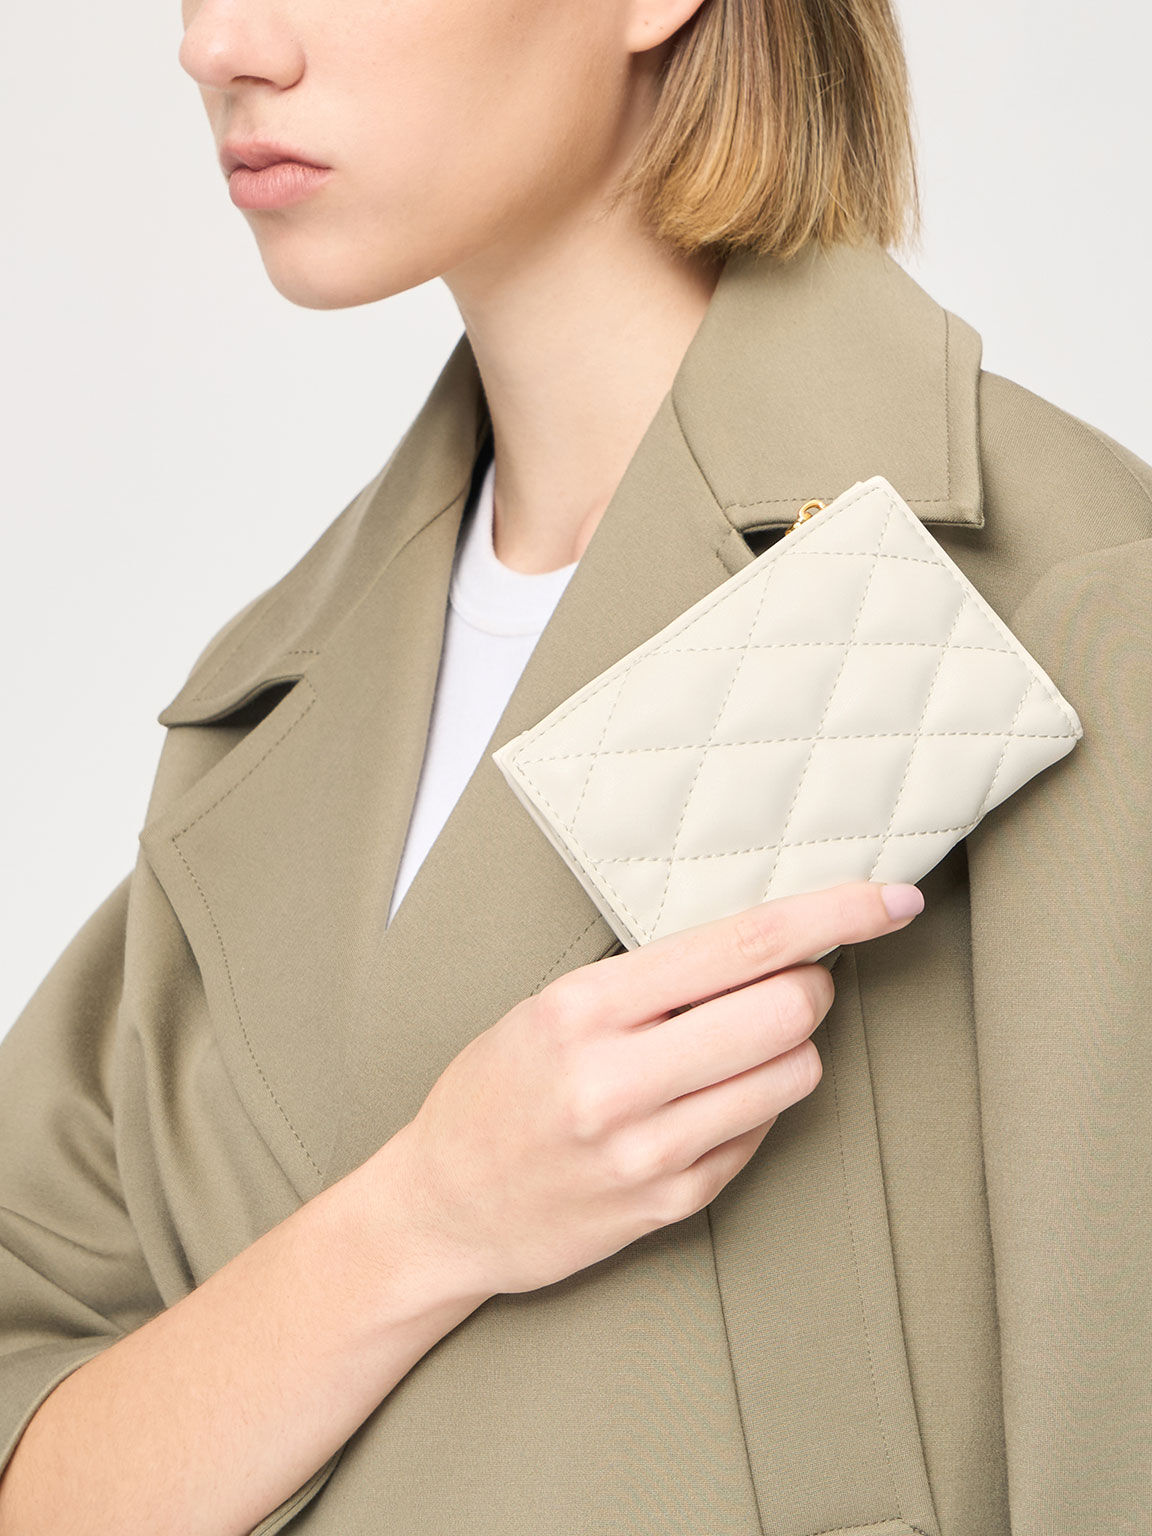 Lillie Quilted Mini Wallet, Cream, hi-res